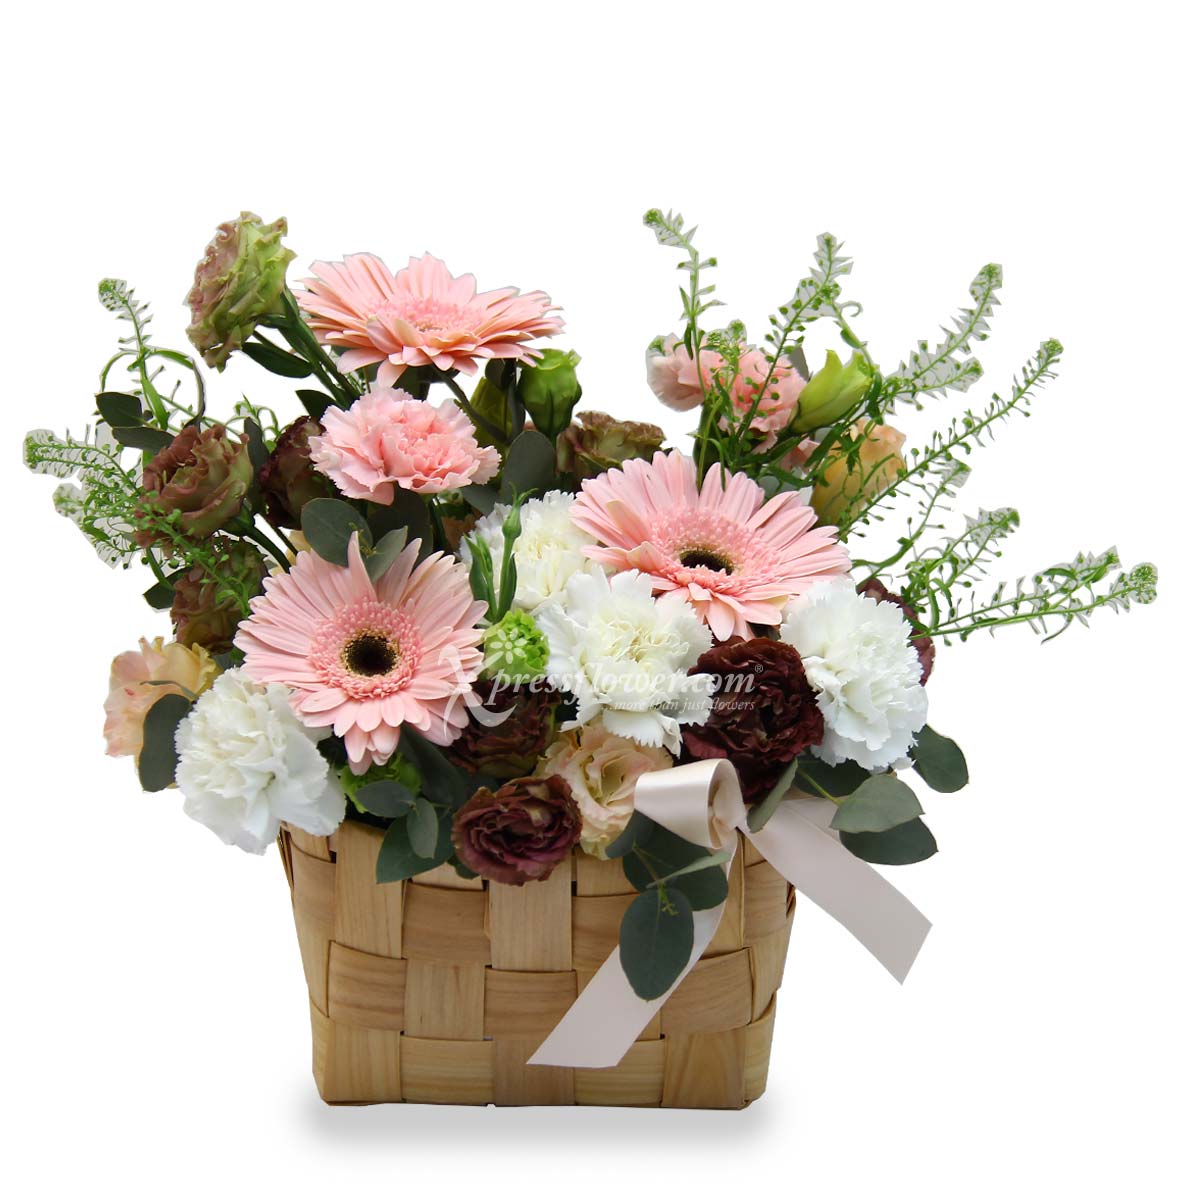 Delightful Smiles (3 Gerberas and 6 Carnations)